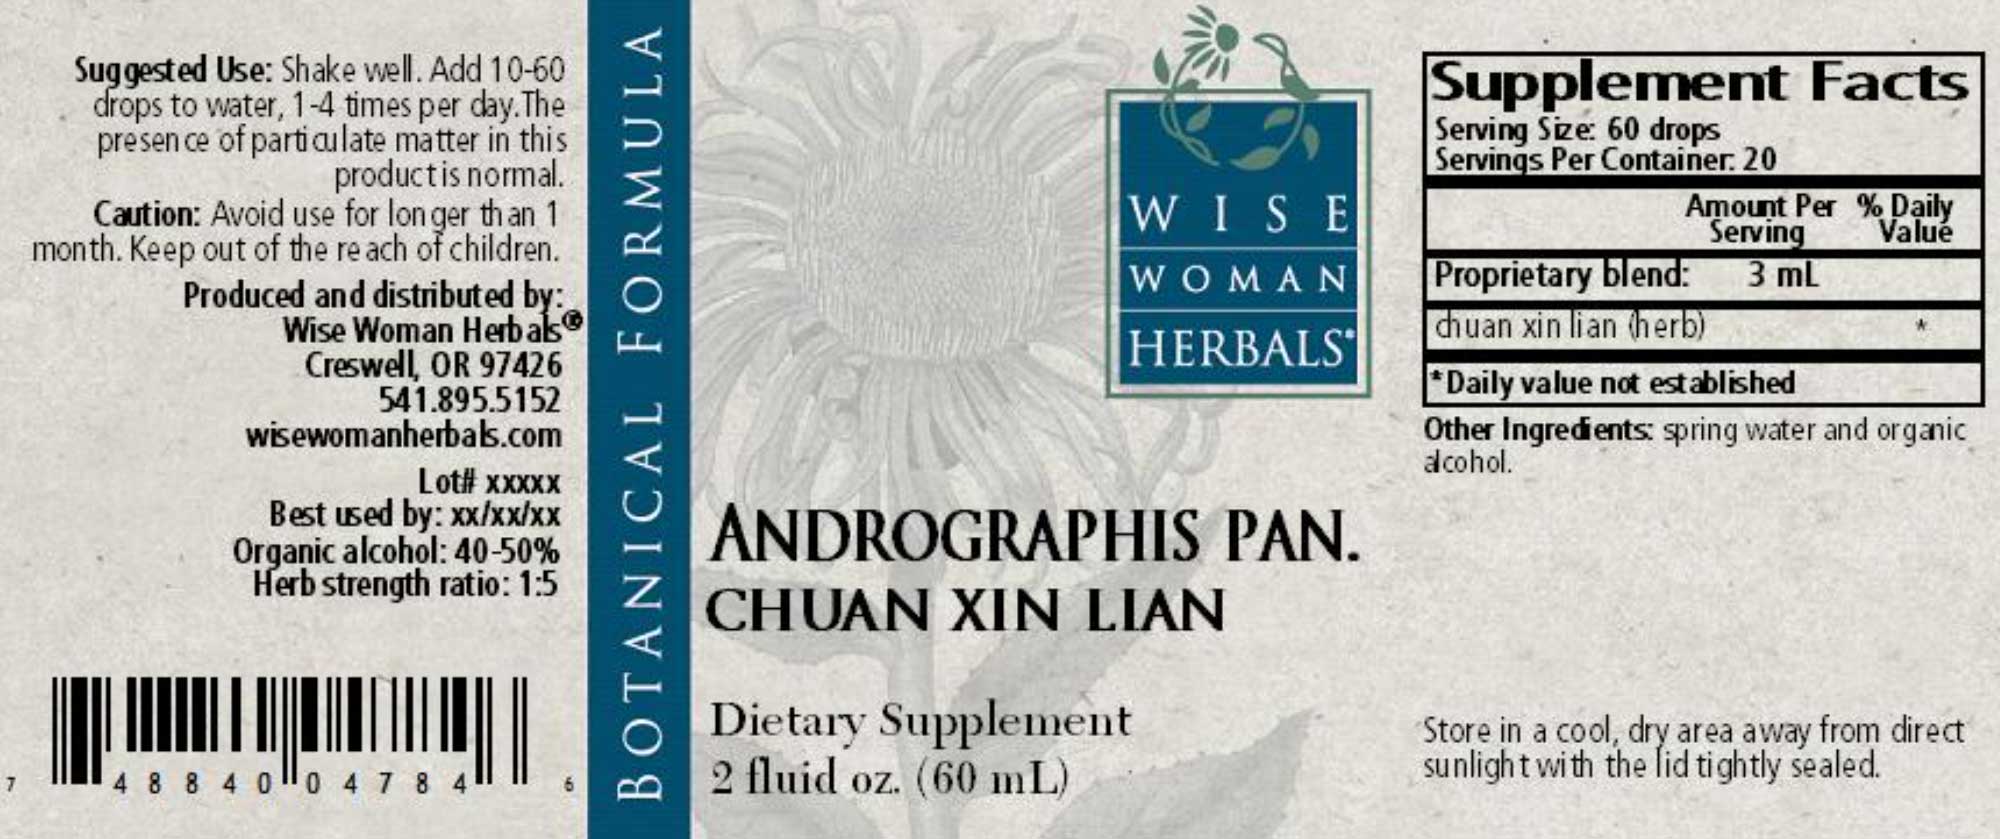 Wise Woman Herbals Andrographis Paniculata Chuan Xin Lian Label